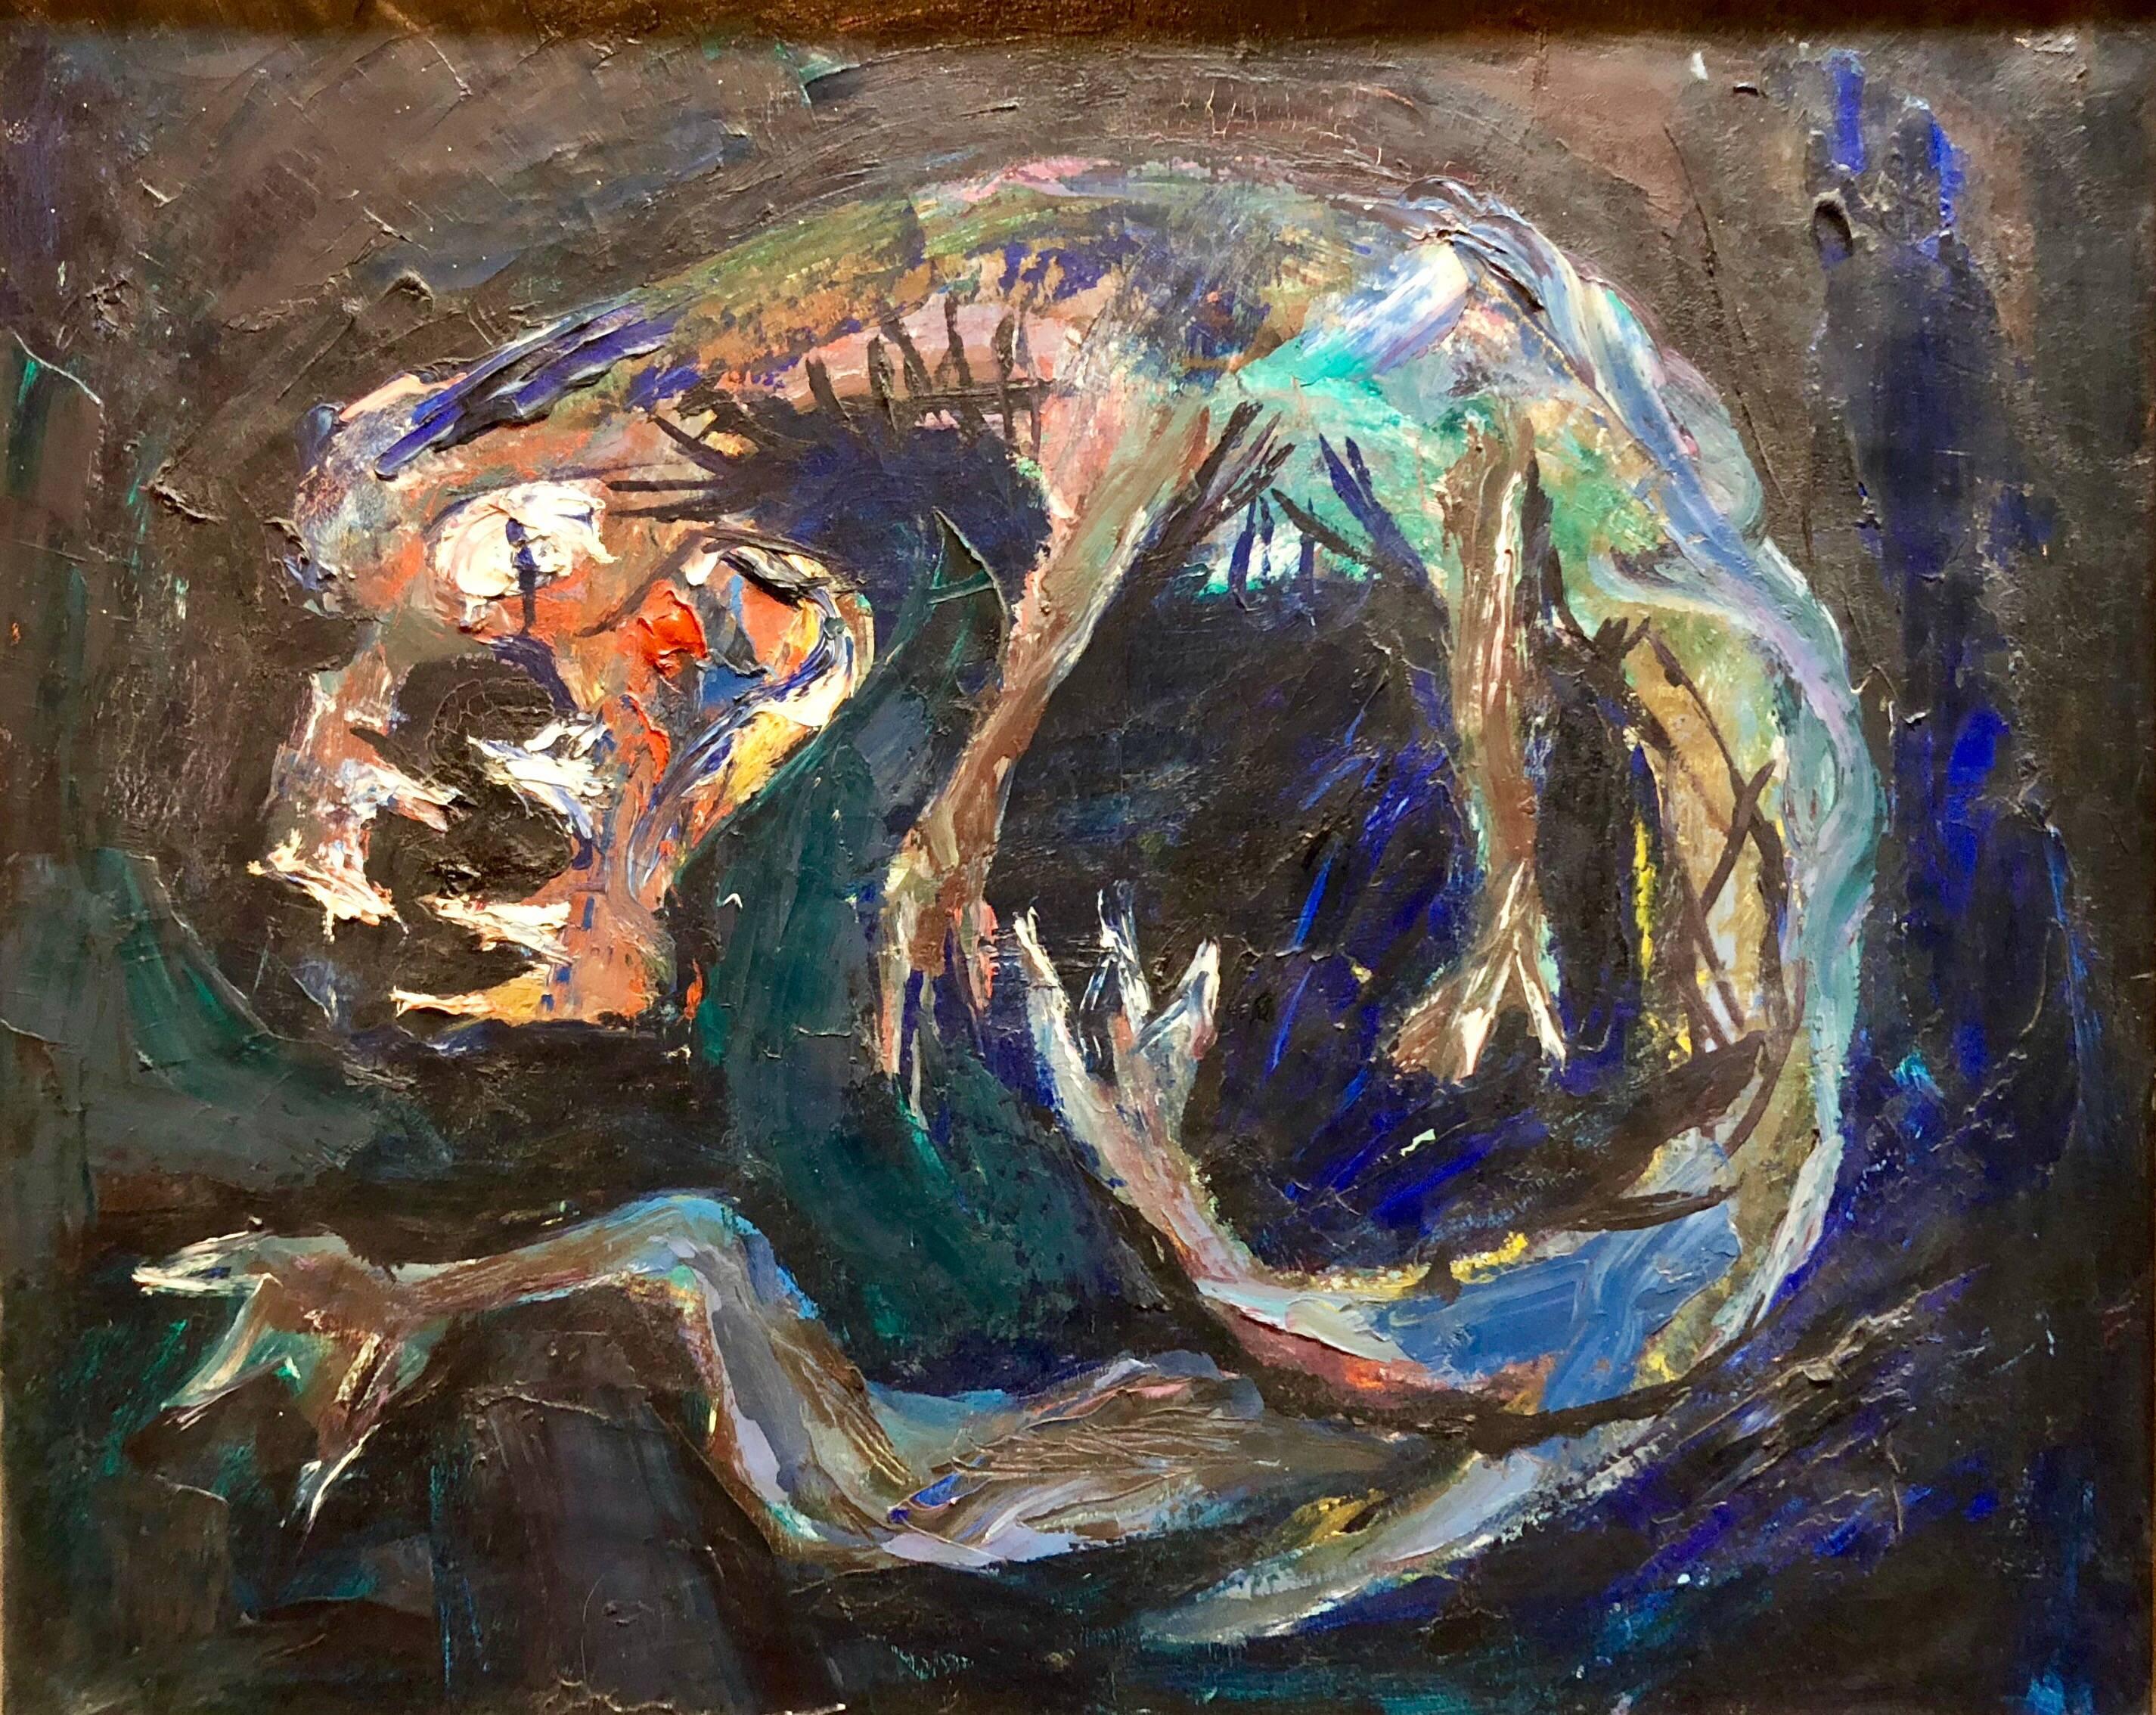 This piece appears unsigned. it is very similar to several of the images in 'Into the Night life' his collaboration with Henry Miller.
Genre: Israeli
Subject: Abstract
Medium: Oil
Surface: Canvas


Bezalel (nicknamed “Lilik”) Schatz was an Israeli